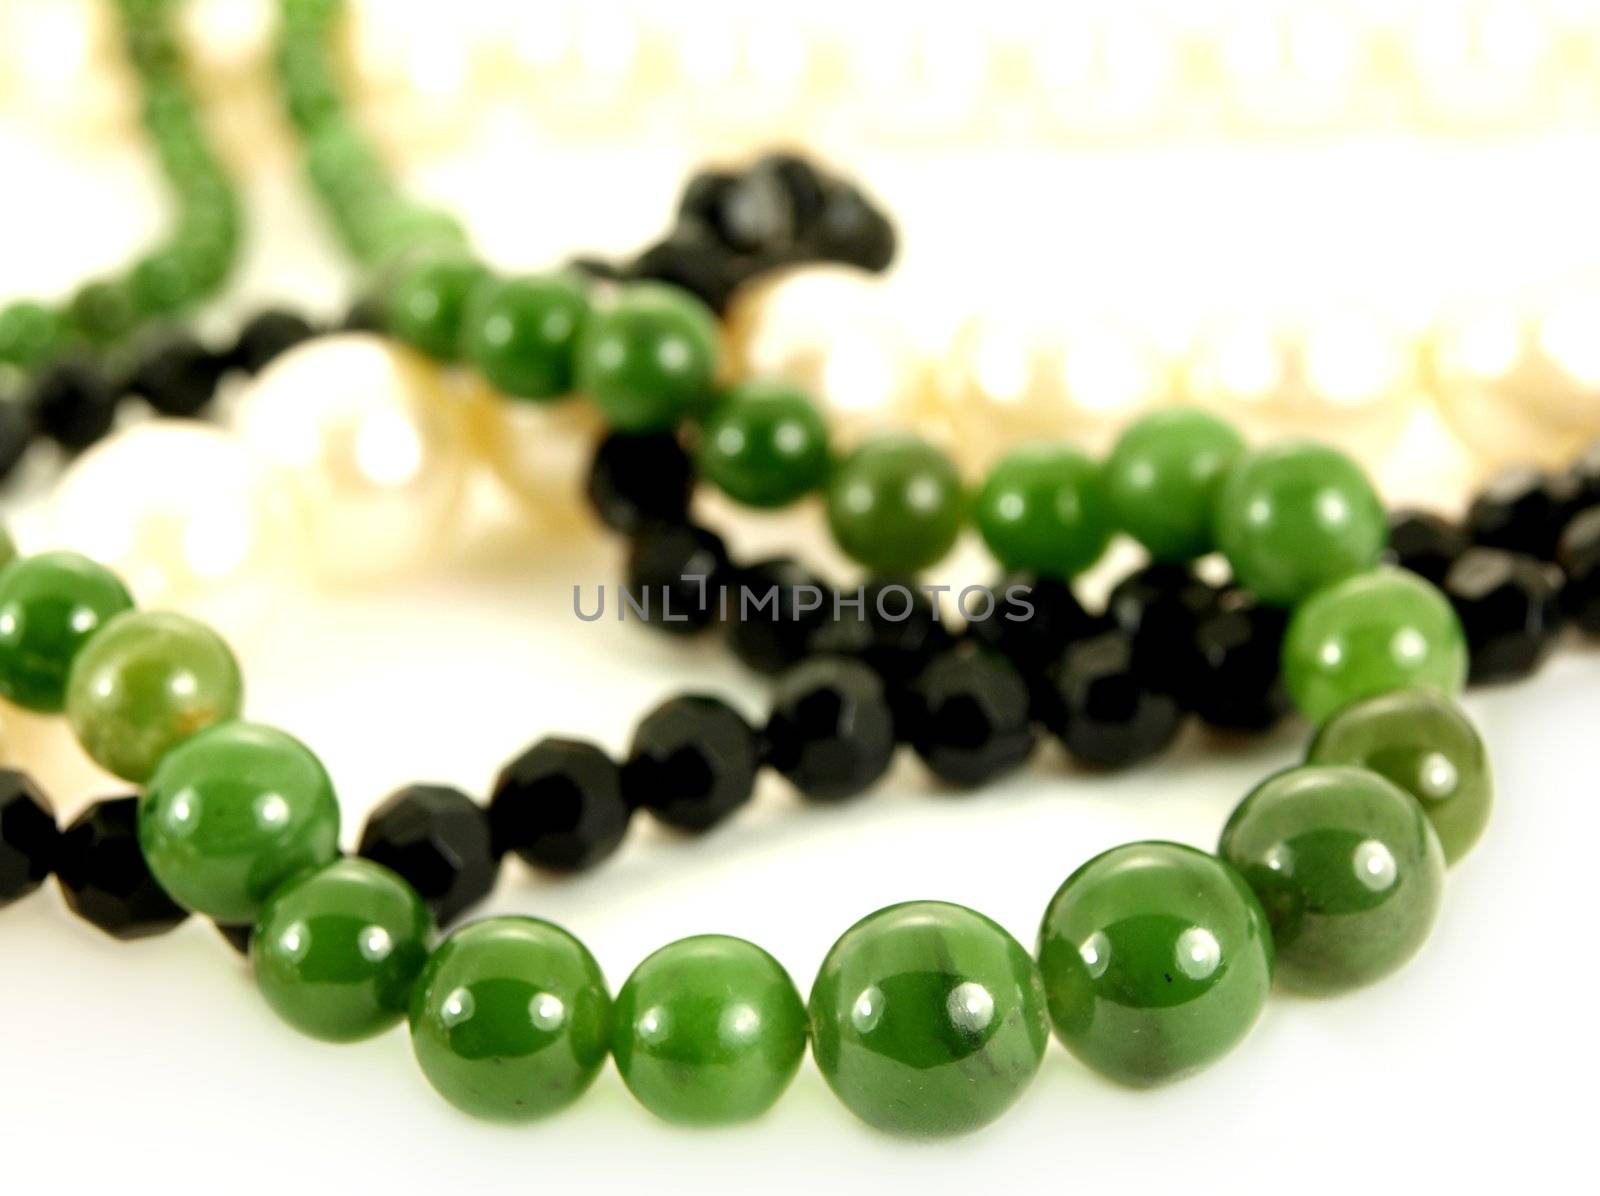 Green gemstone, white pearls, and black pearl necklace, isolated towards white background